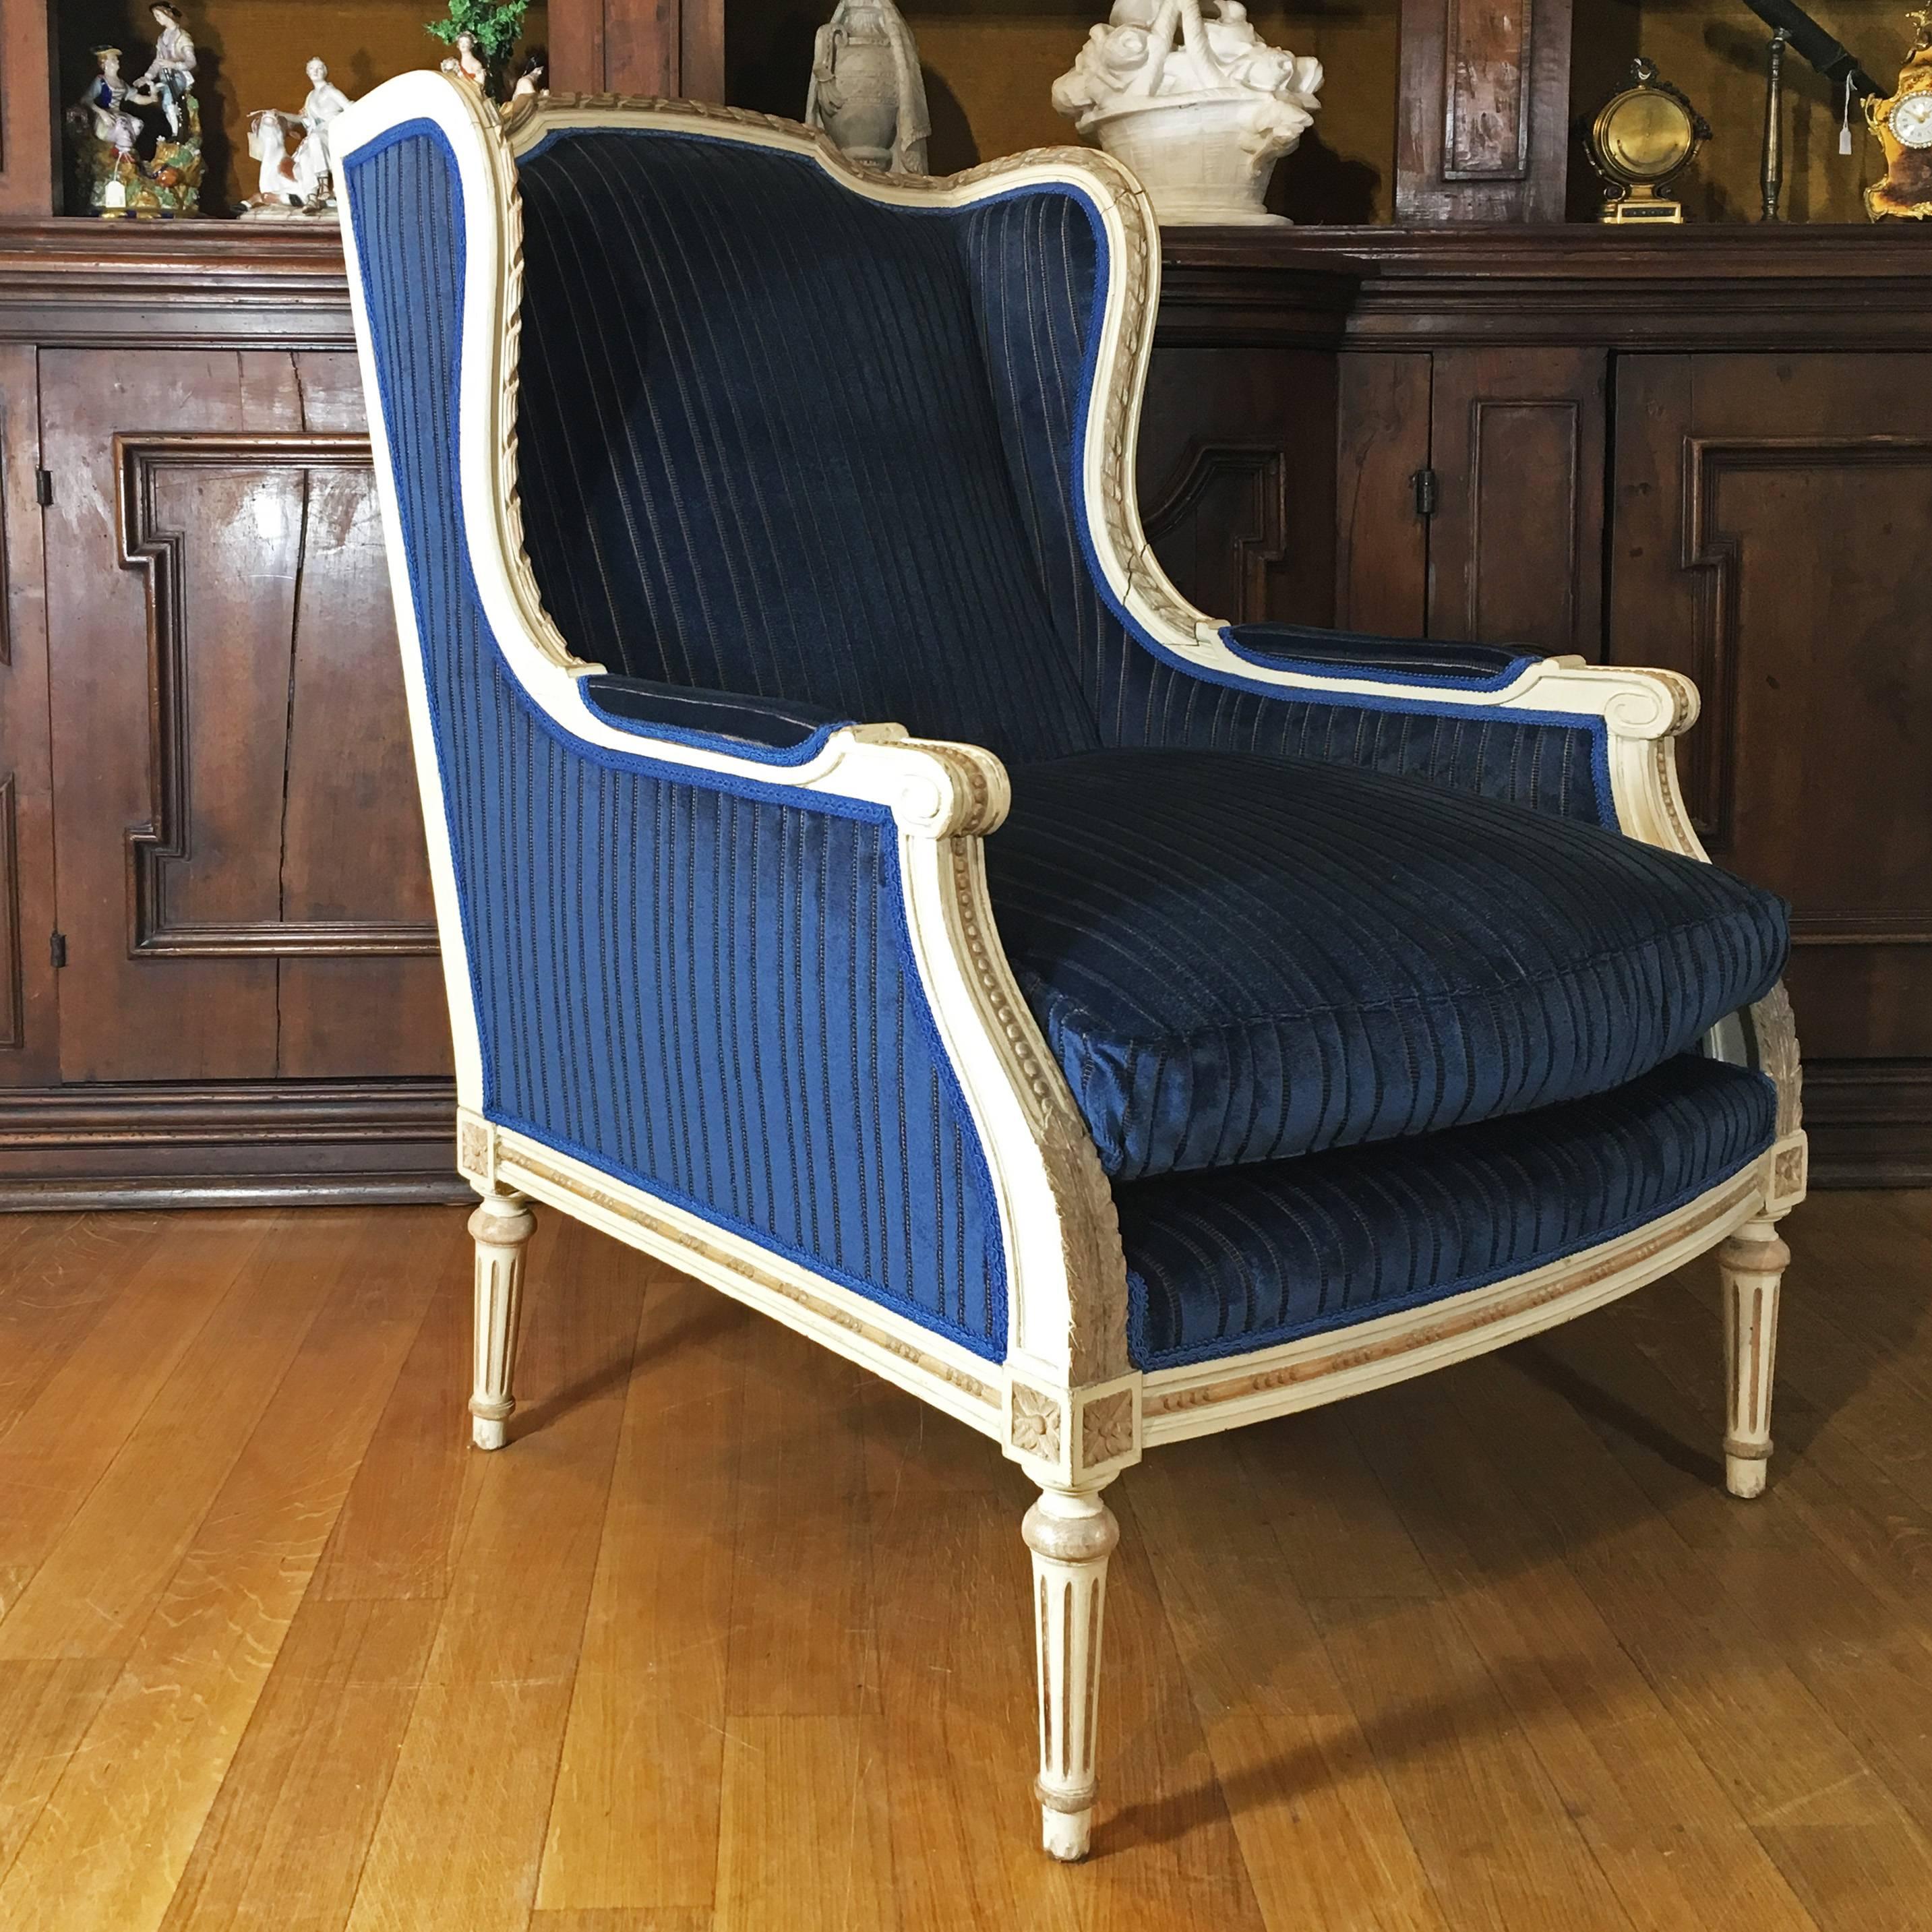 Hand-Carved Mid-19th Century Italian Louis XVI Style Painted Polpar Wood Wing Chairs For Sale